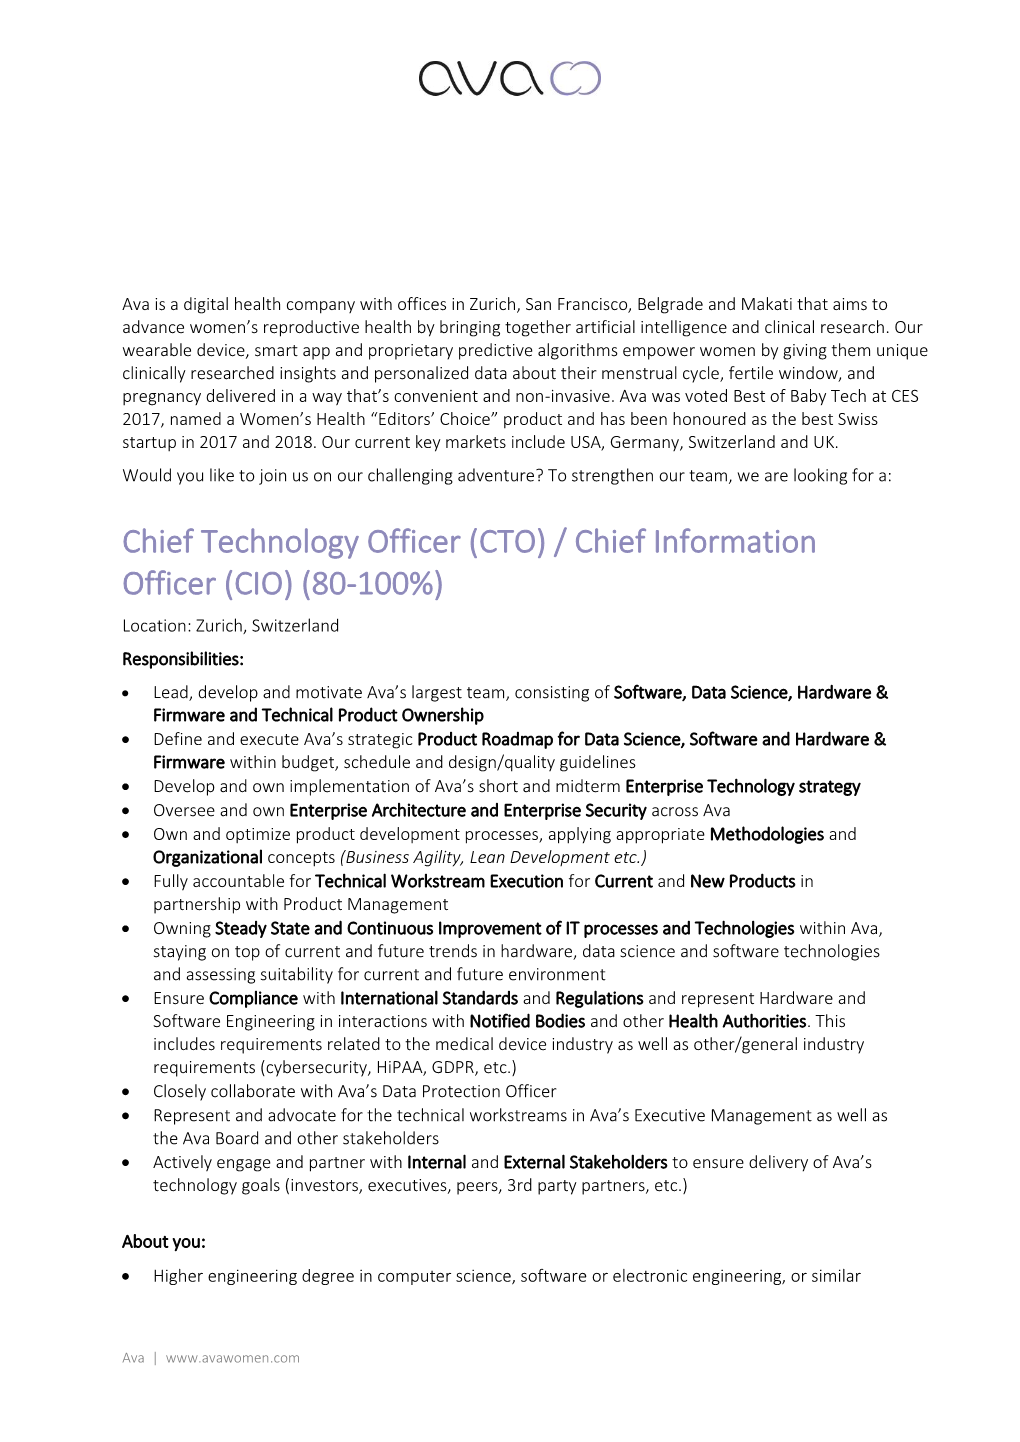 Chief Technology Officer (CTO) / Chief Information Officer (CIO) (80-100%)